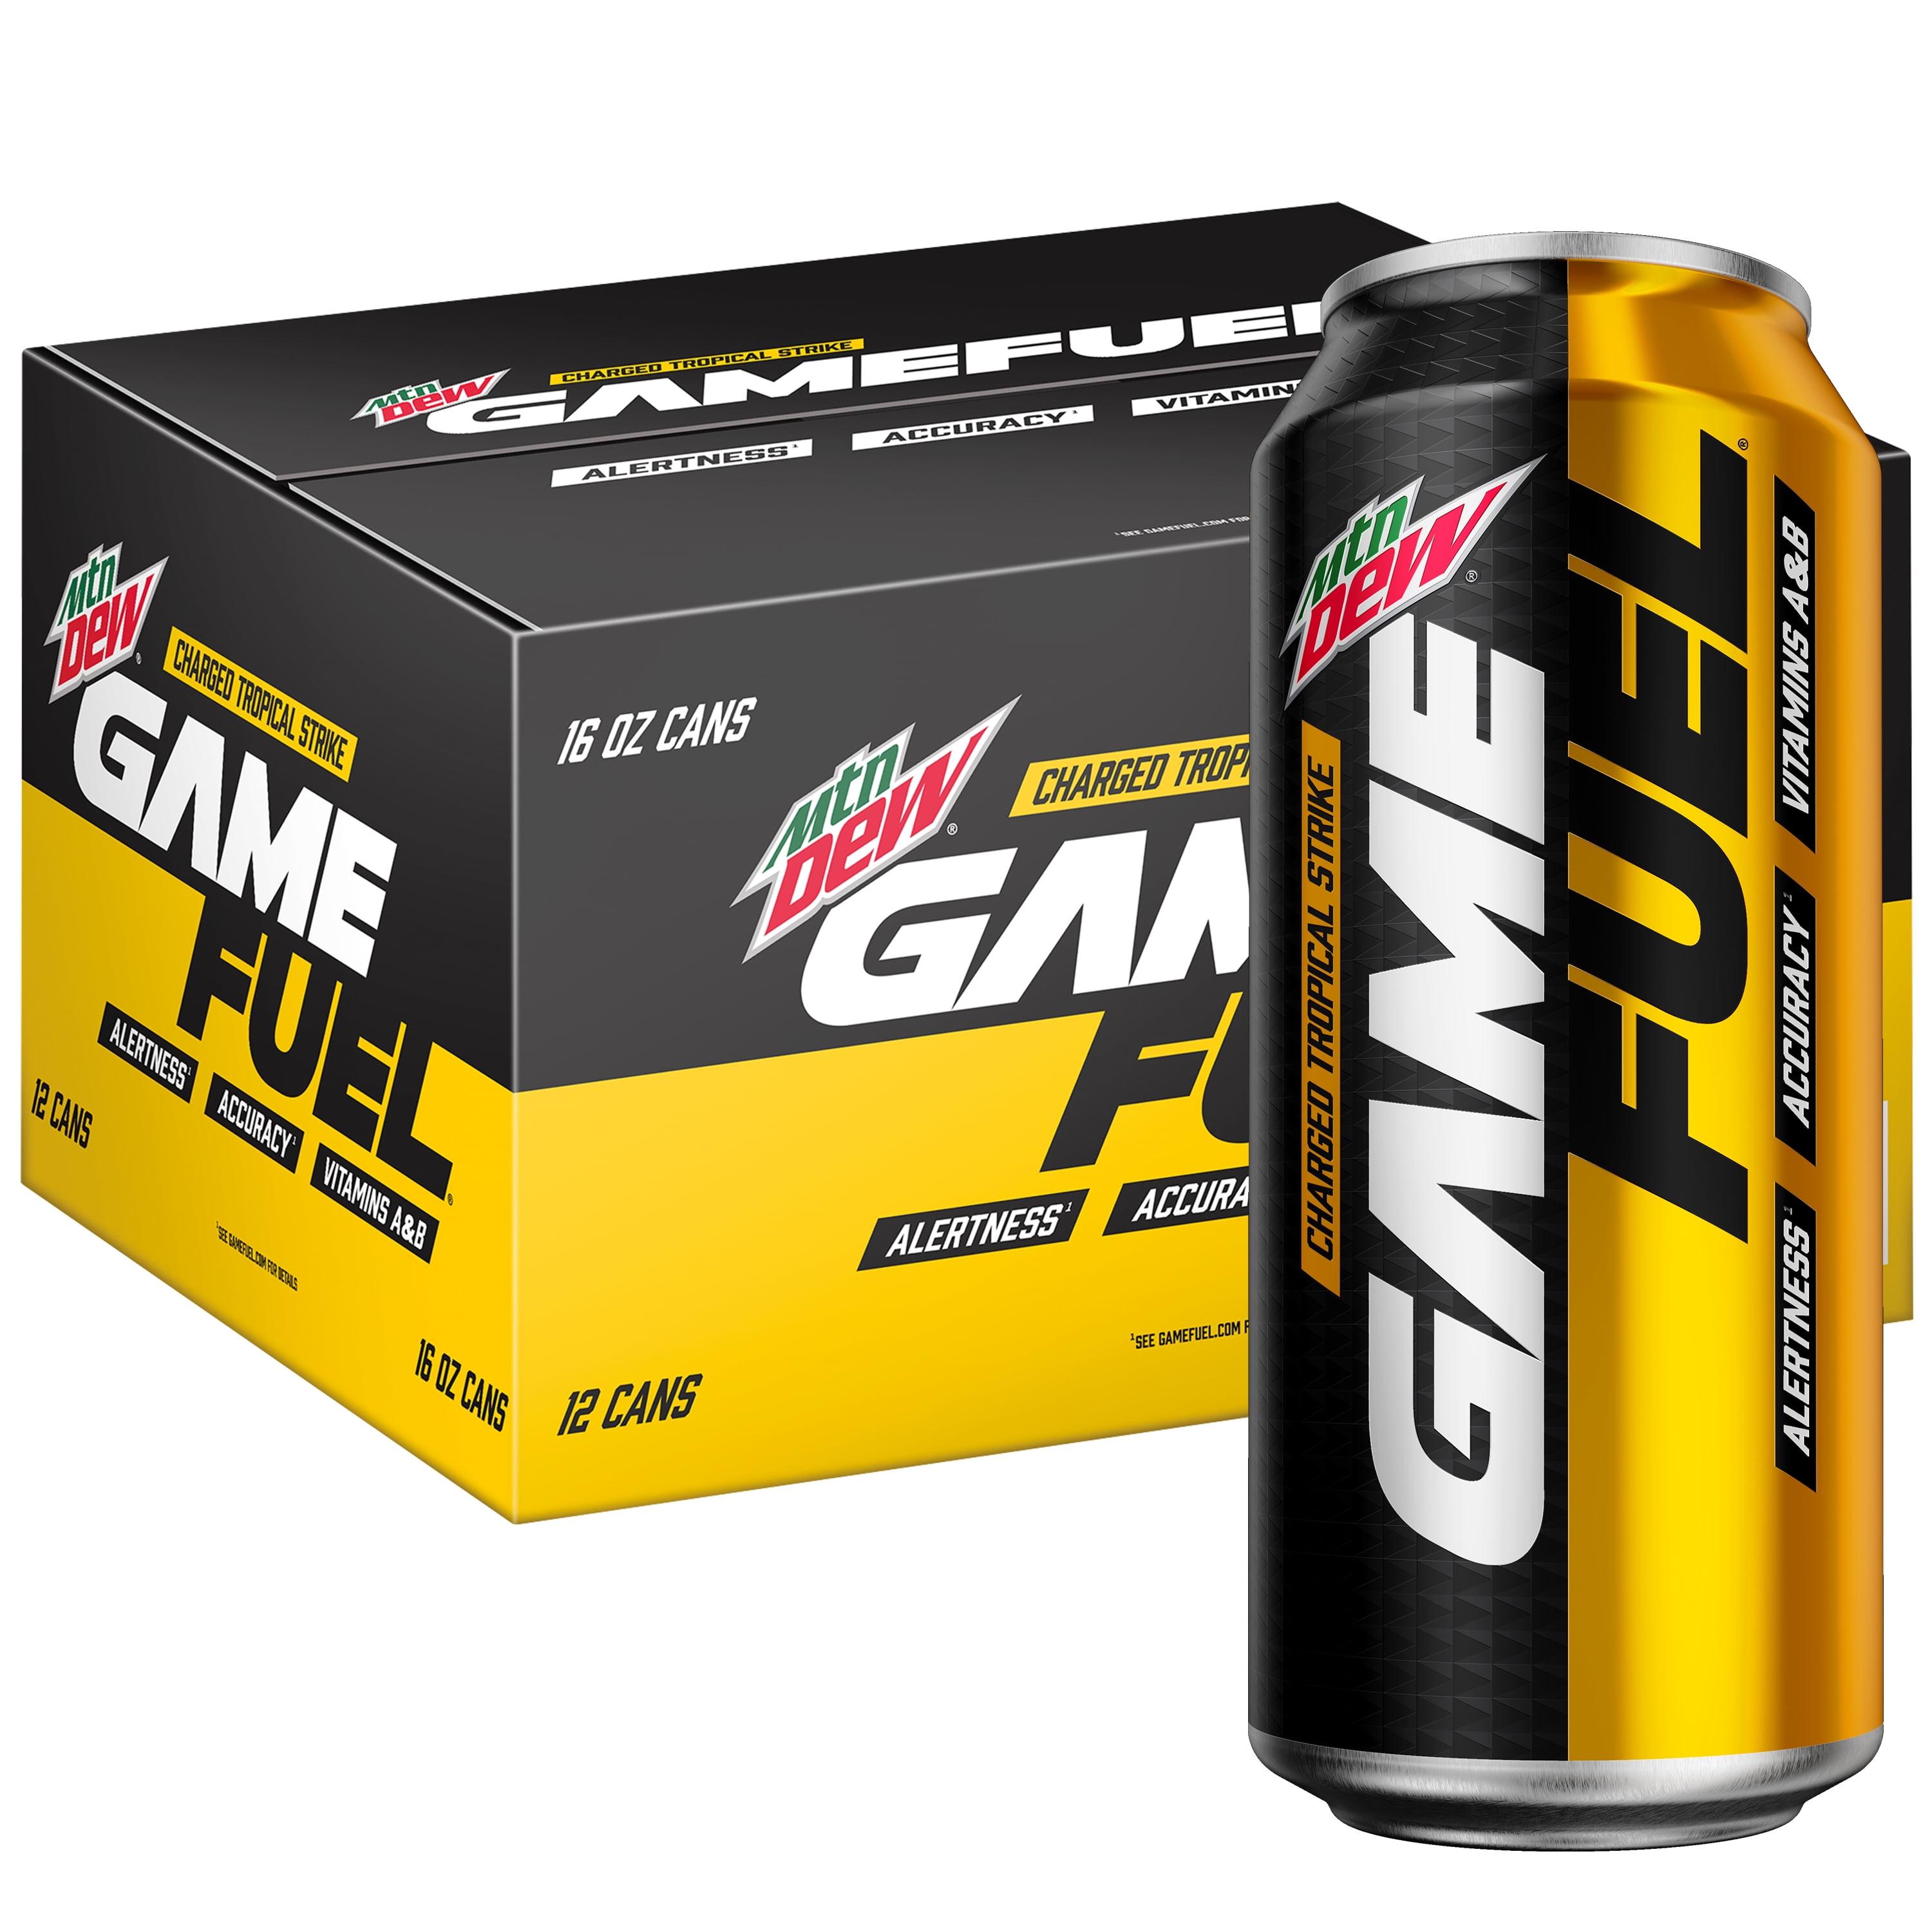 Photo 1 of (12 Cans) MTN DEW GAME FUEL, Charged Tropical Strike, 16 fl oz Expired September 6 2021